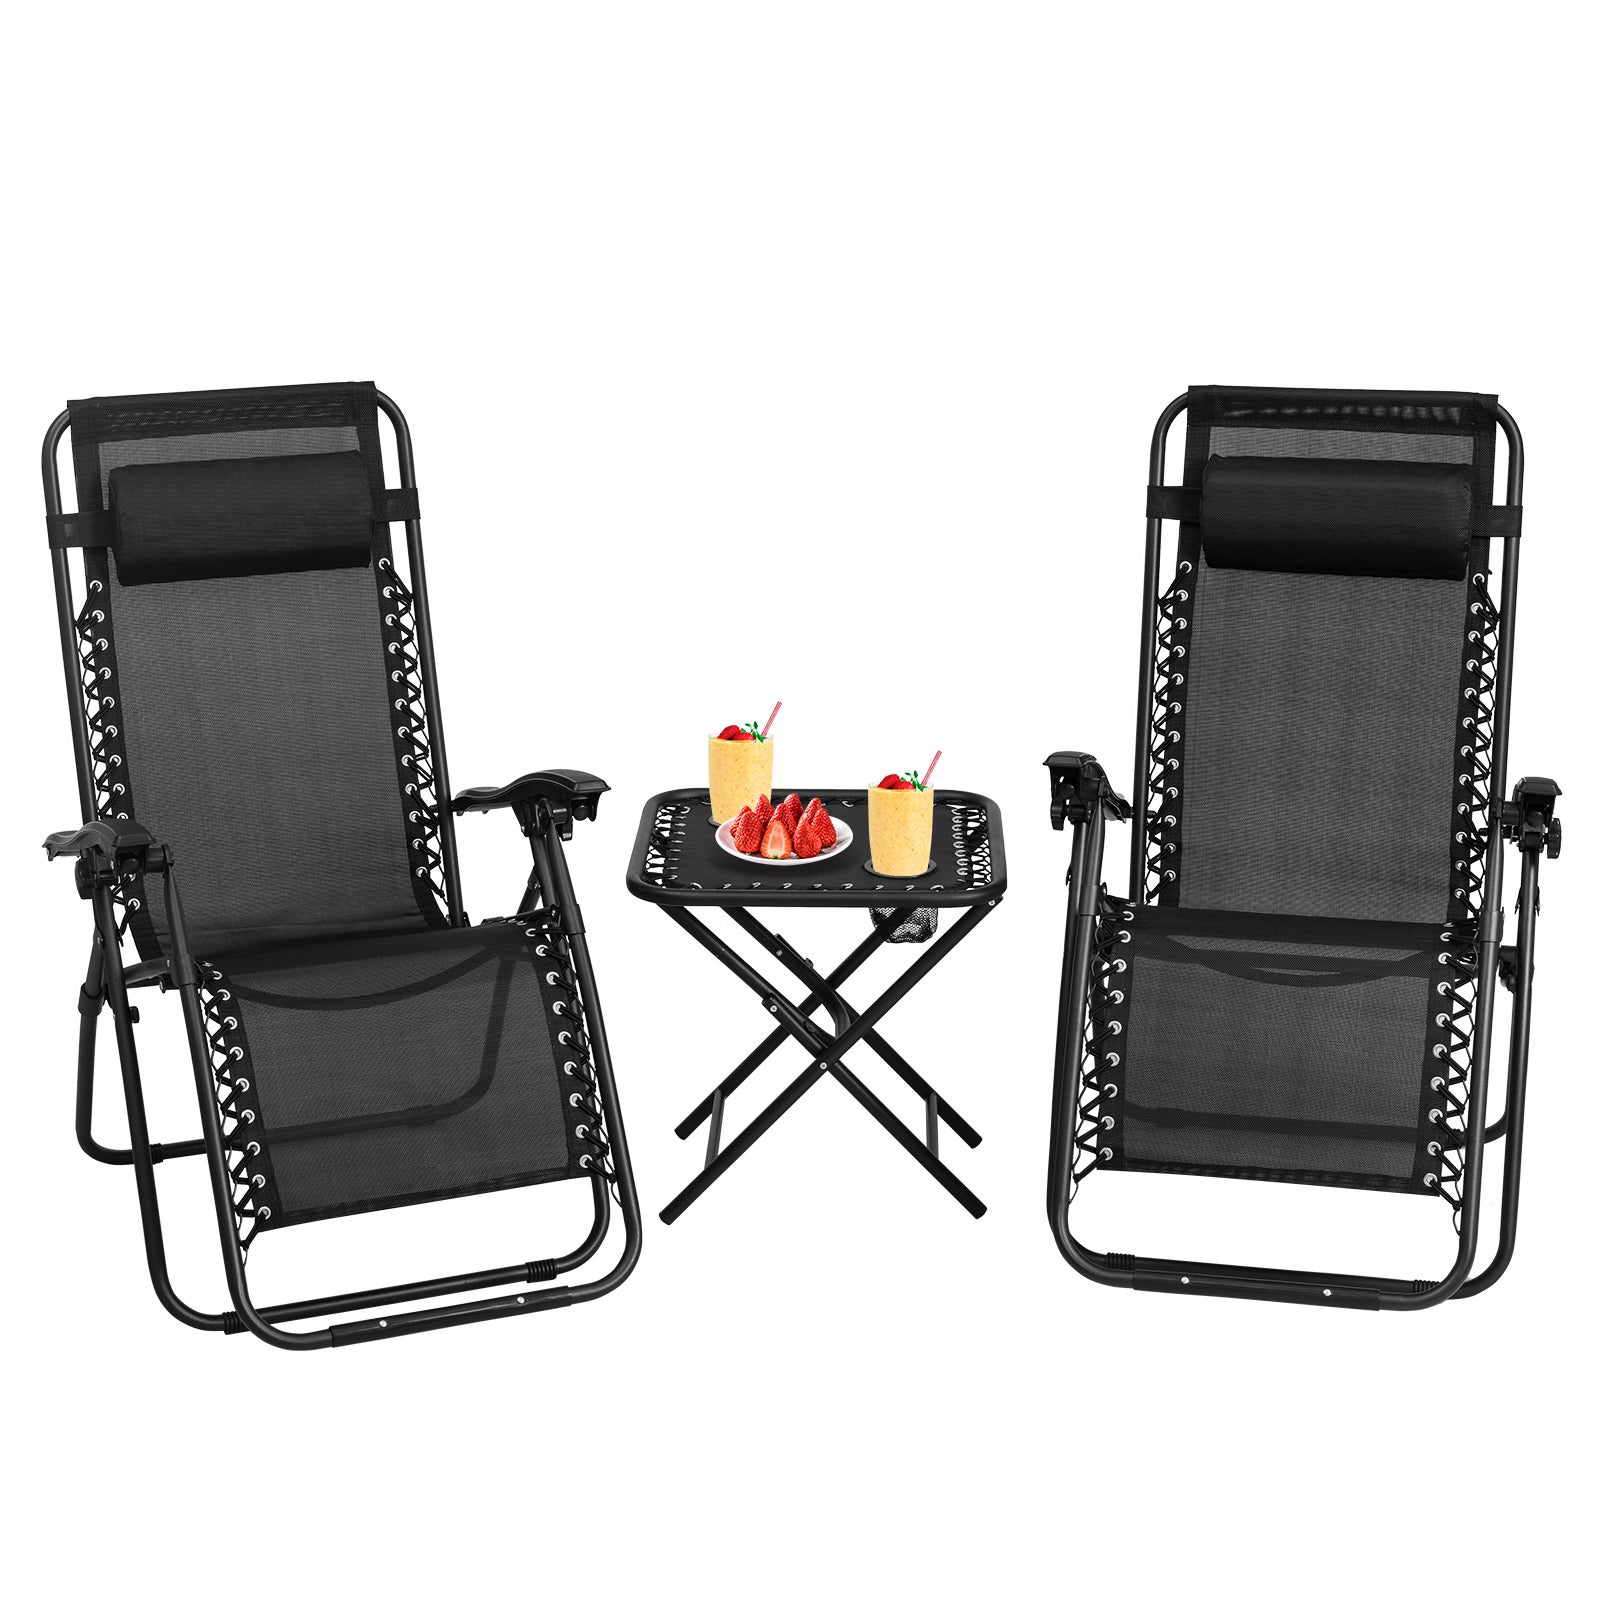 Costway 3PC Outdoor Furniture Textile Table Chairs Set Folding Table Dining Chairs Bistro Patio Garden Balcony Black